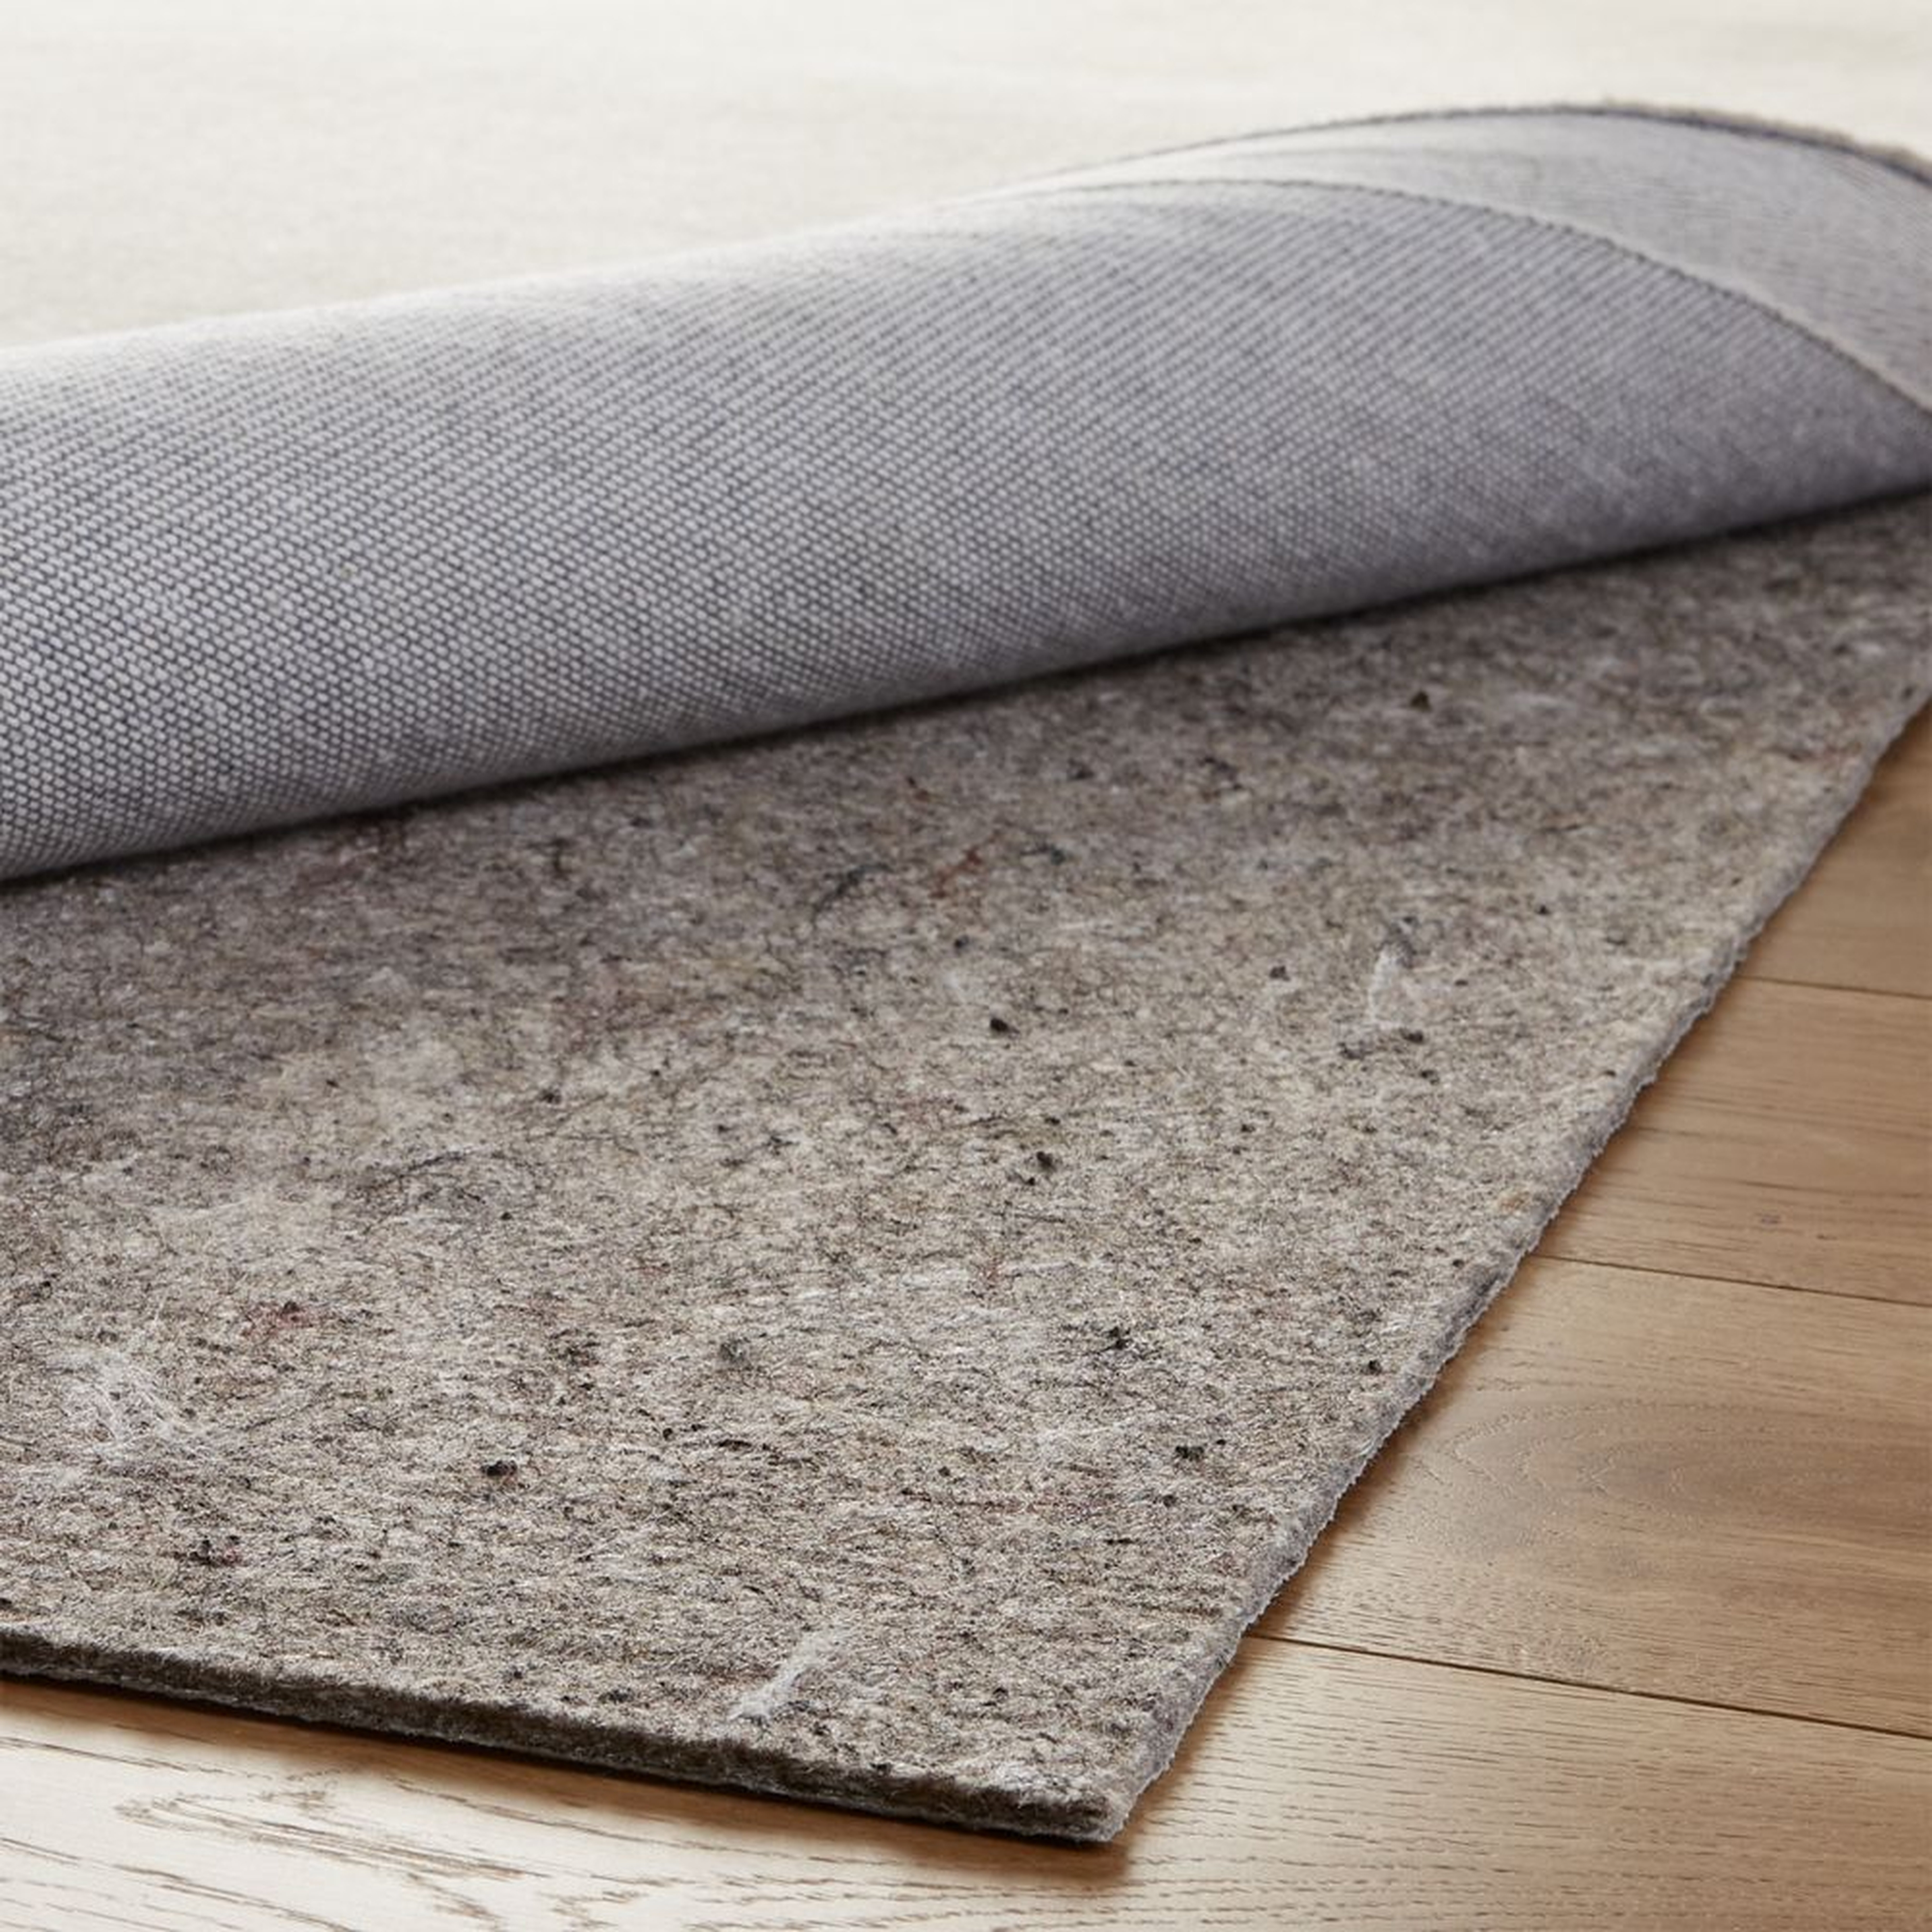 Multisurface 8'x10' Thick Rug Pad - Crate and Barrel